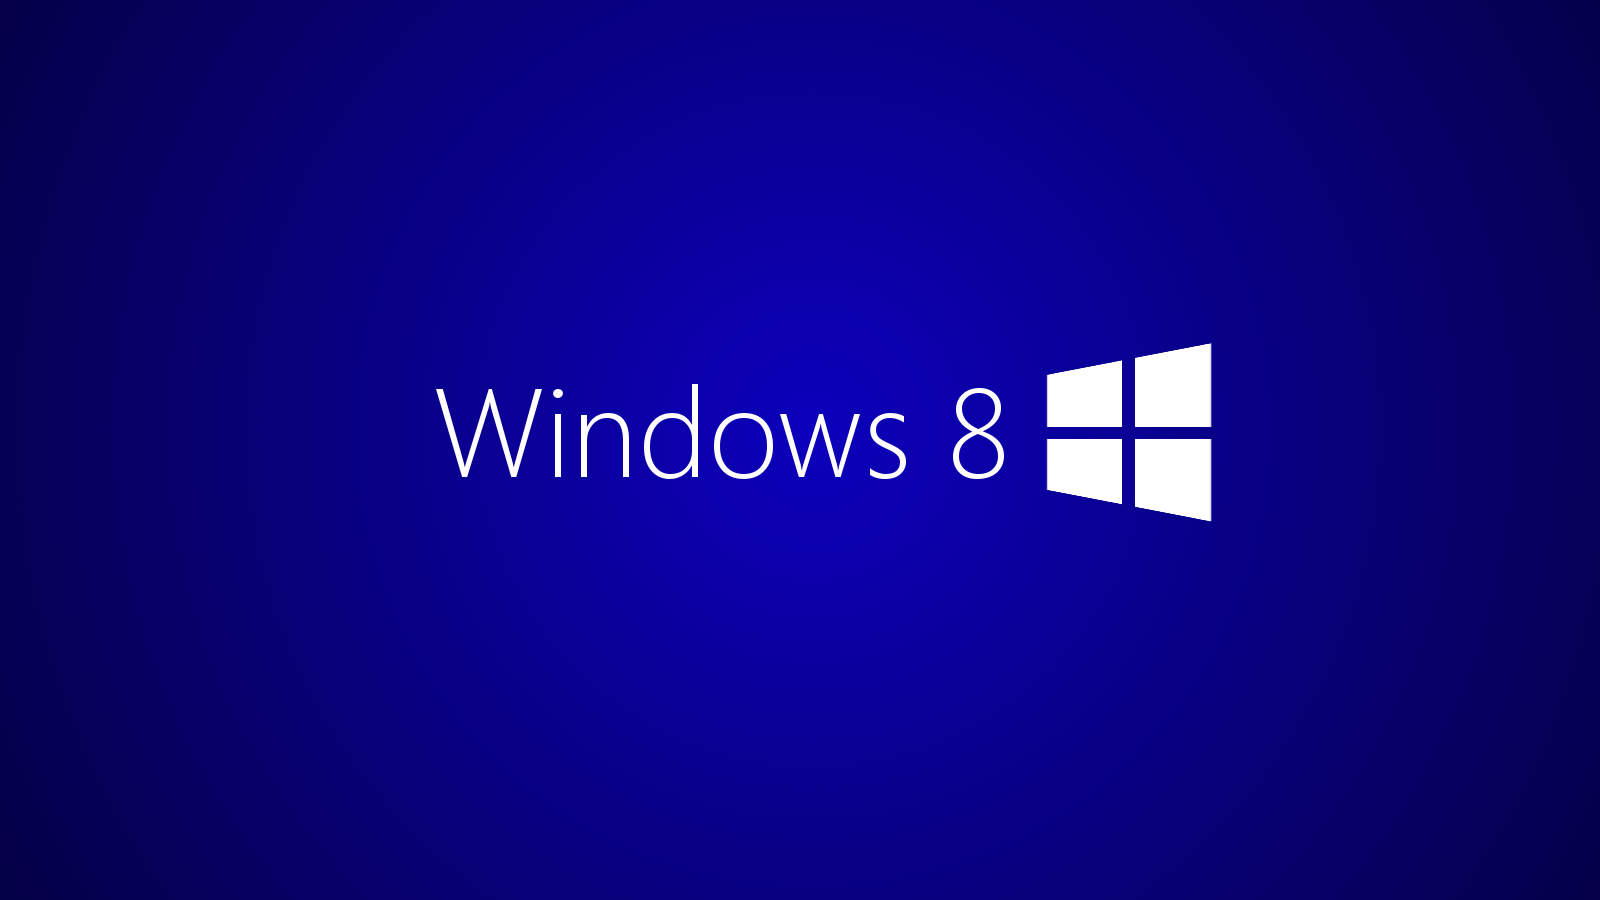 Windows 8 Official Logo - Windows 8 Official Wallpapers - Wallpaper Cave